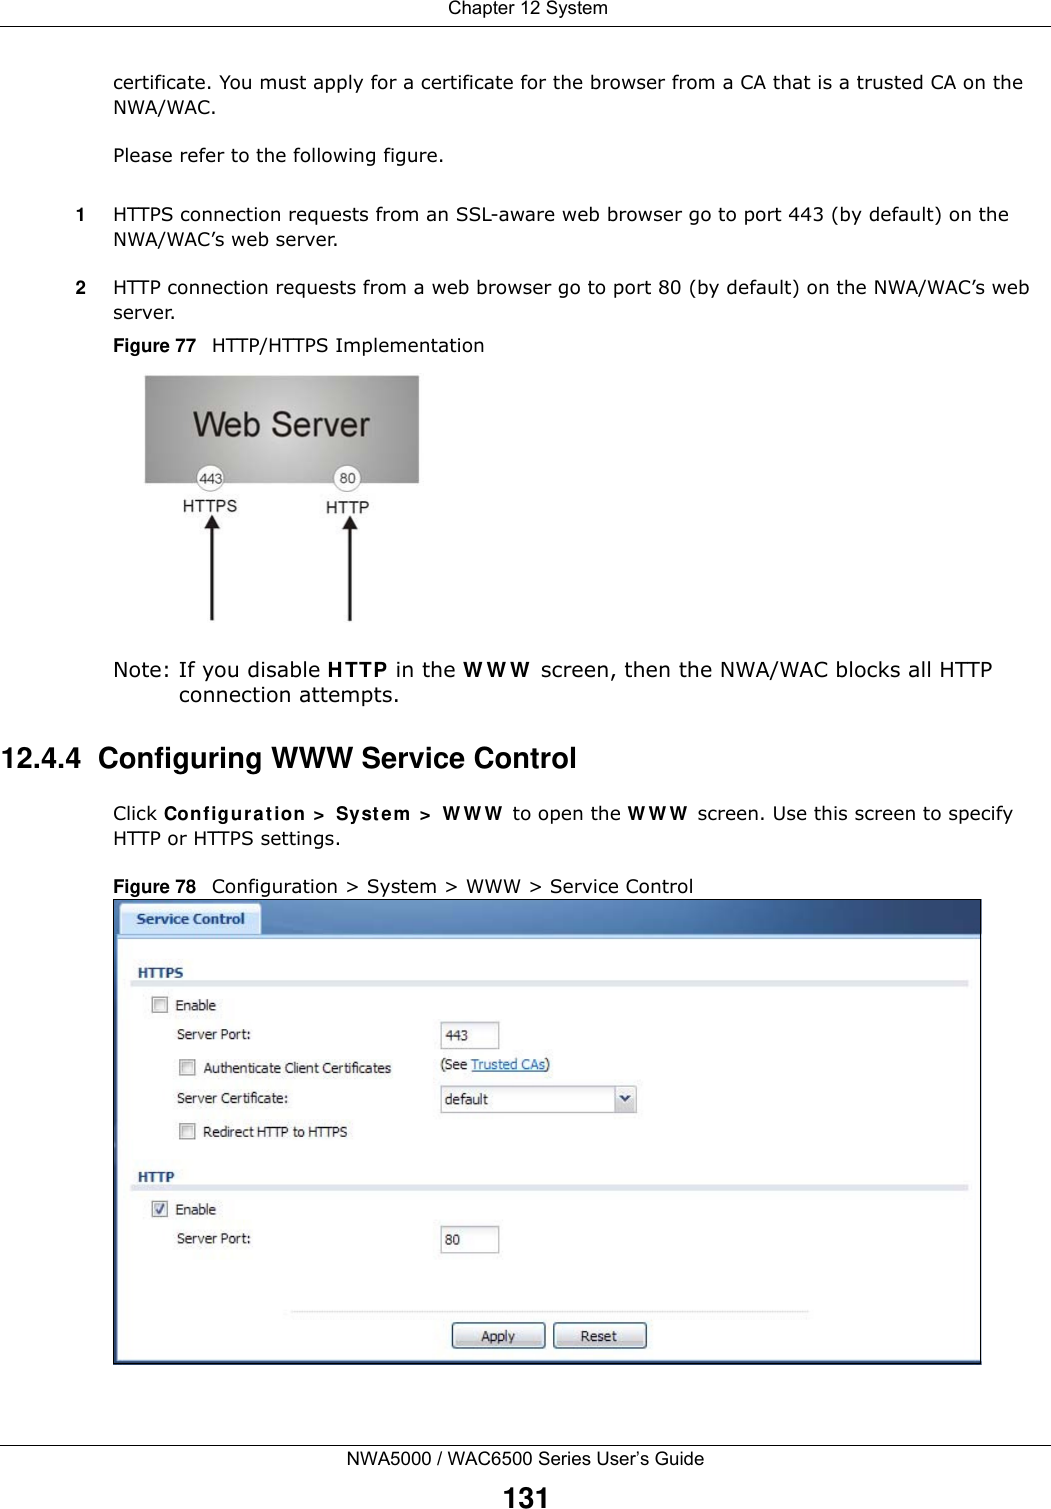  Chapter 12 SystemNWA5000 / WAC6500 Series User’s Guide131certificate. You must apply for a certificate for the browser from a CA that is a trusted CA on the NWA/WAC.Please refer to the following figure.1HTTPS connection requests from an SSL-aware web browser go to port 443 (by default) on the NWA/WAC’s web server.2HTTP connection requests from a web browser go to port 80 (by default) on the NWA/WAC’s web server.Figure 77   HTTP/HTTPS ImplementationNote: If you disable H TTP in the W W W  screen, then the NWA/WAC blocks all HTTP connection attempts.12.4.4  Configuring WWW Service ControlClick Configu rat ion  &gt;  Syste m  &gt;  W W W  to open the W W W  screen. Use this screen to specify HTTP or HTTPS settings. Figure 78   Configuration &gt; System &gt; WWW &gt; Service Control